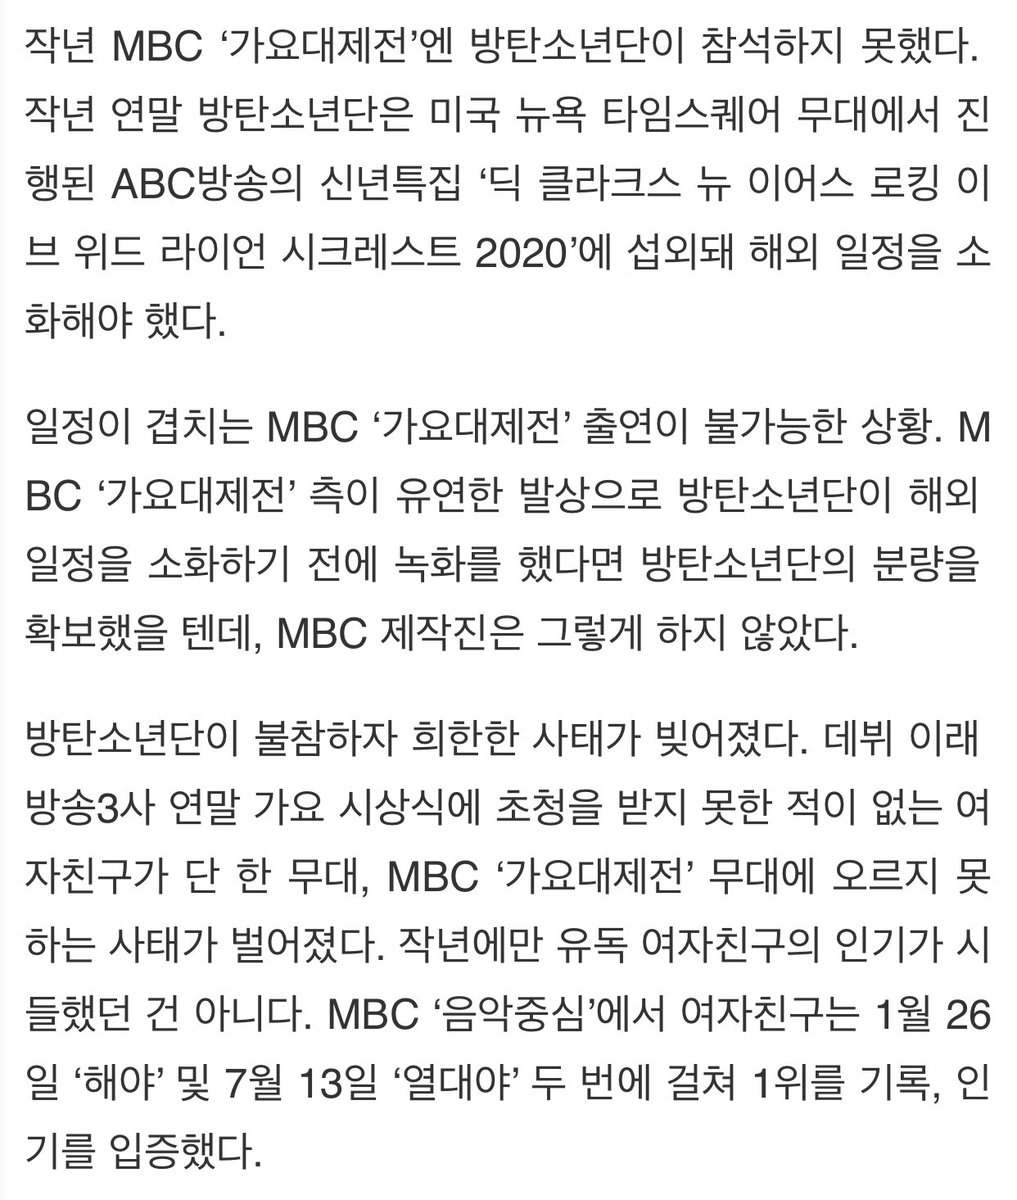 They were invited to Dick Clark’s Rockin Eve at Times Sq & had to go to NY. Bc the dates overlapped, it was impossible to go to MBC. Had MBC been flexible enough to allow BTS to prerecord their pt, they would’ve gotten BTS on the show, but the MBC production team didn’t do that.+